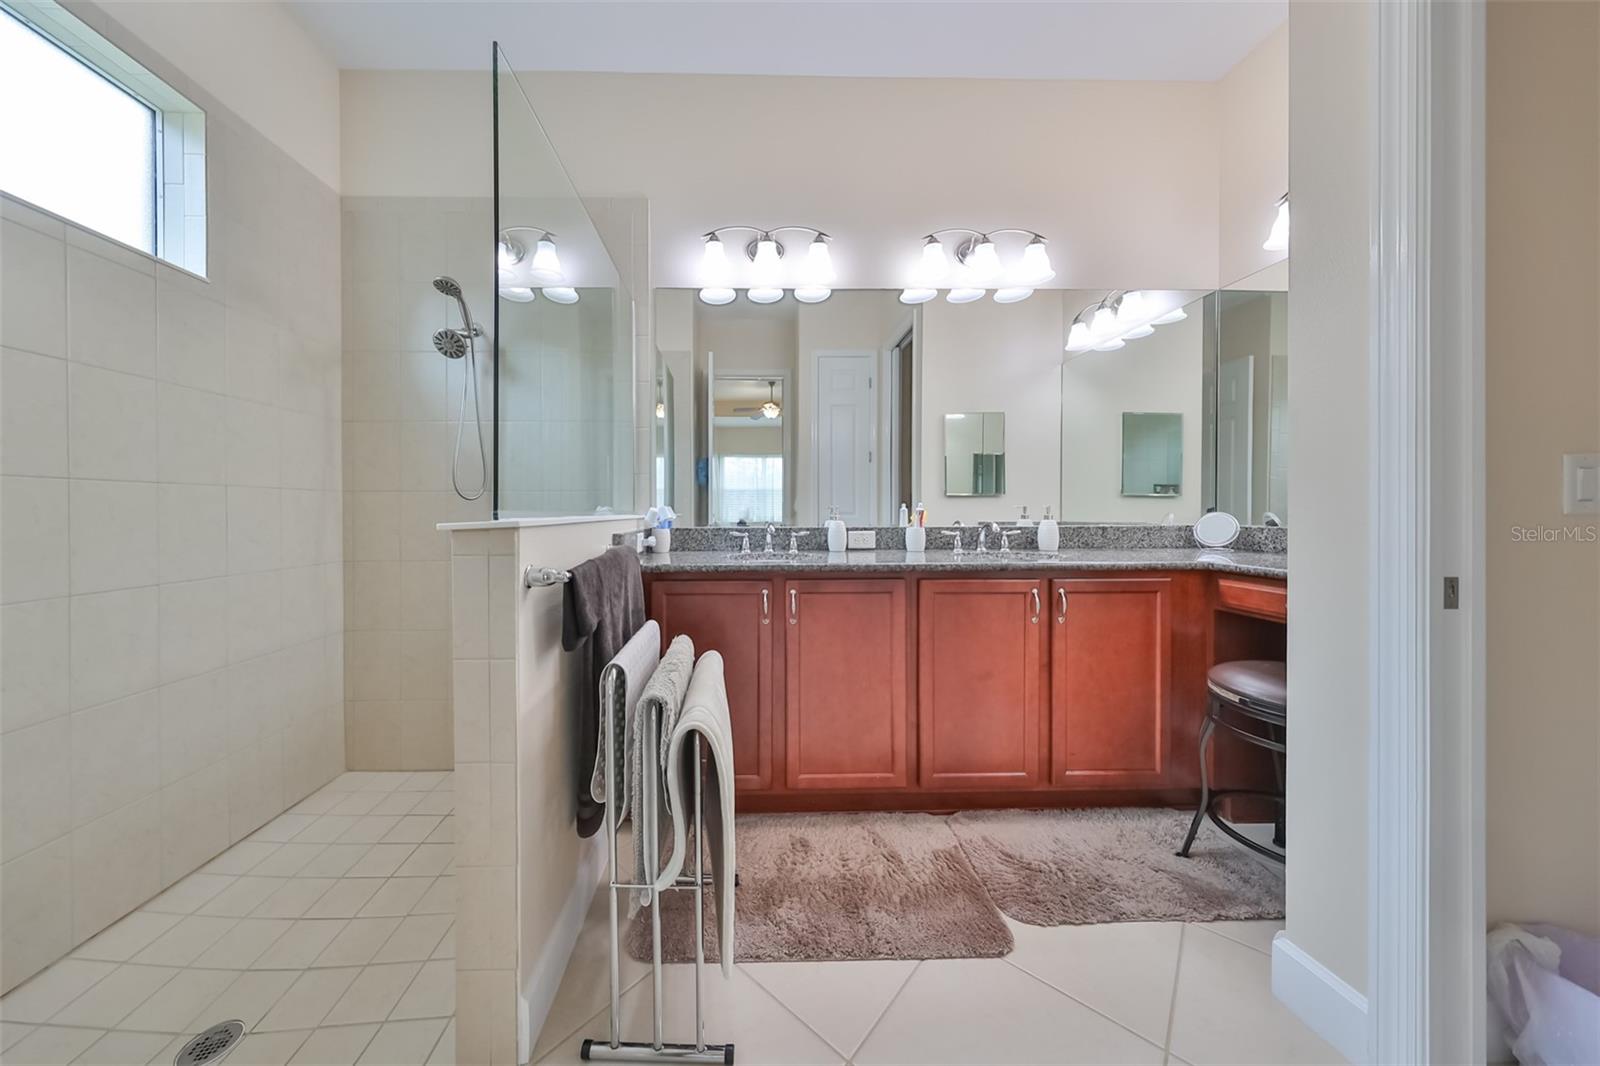 Ensuite Bathroom is stunning with red oak cabinets, large walk in shower, bright lights, granite counter tops and a private water closet.